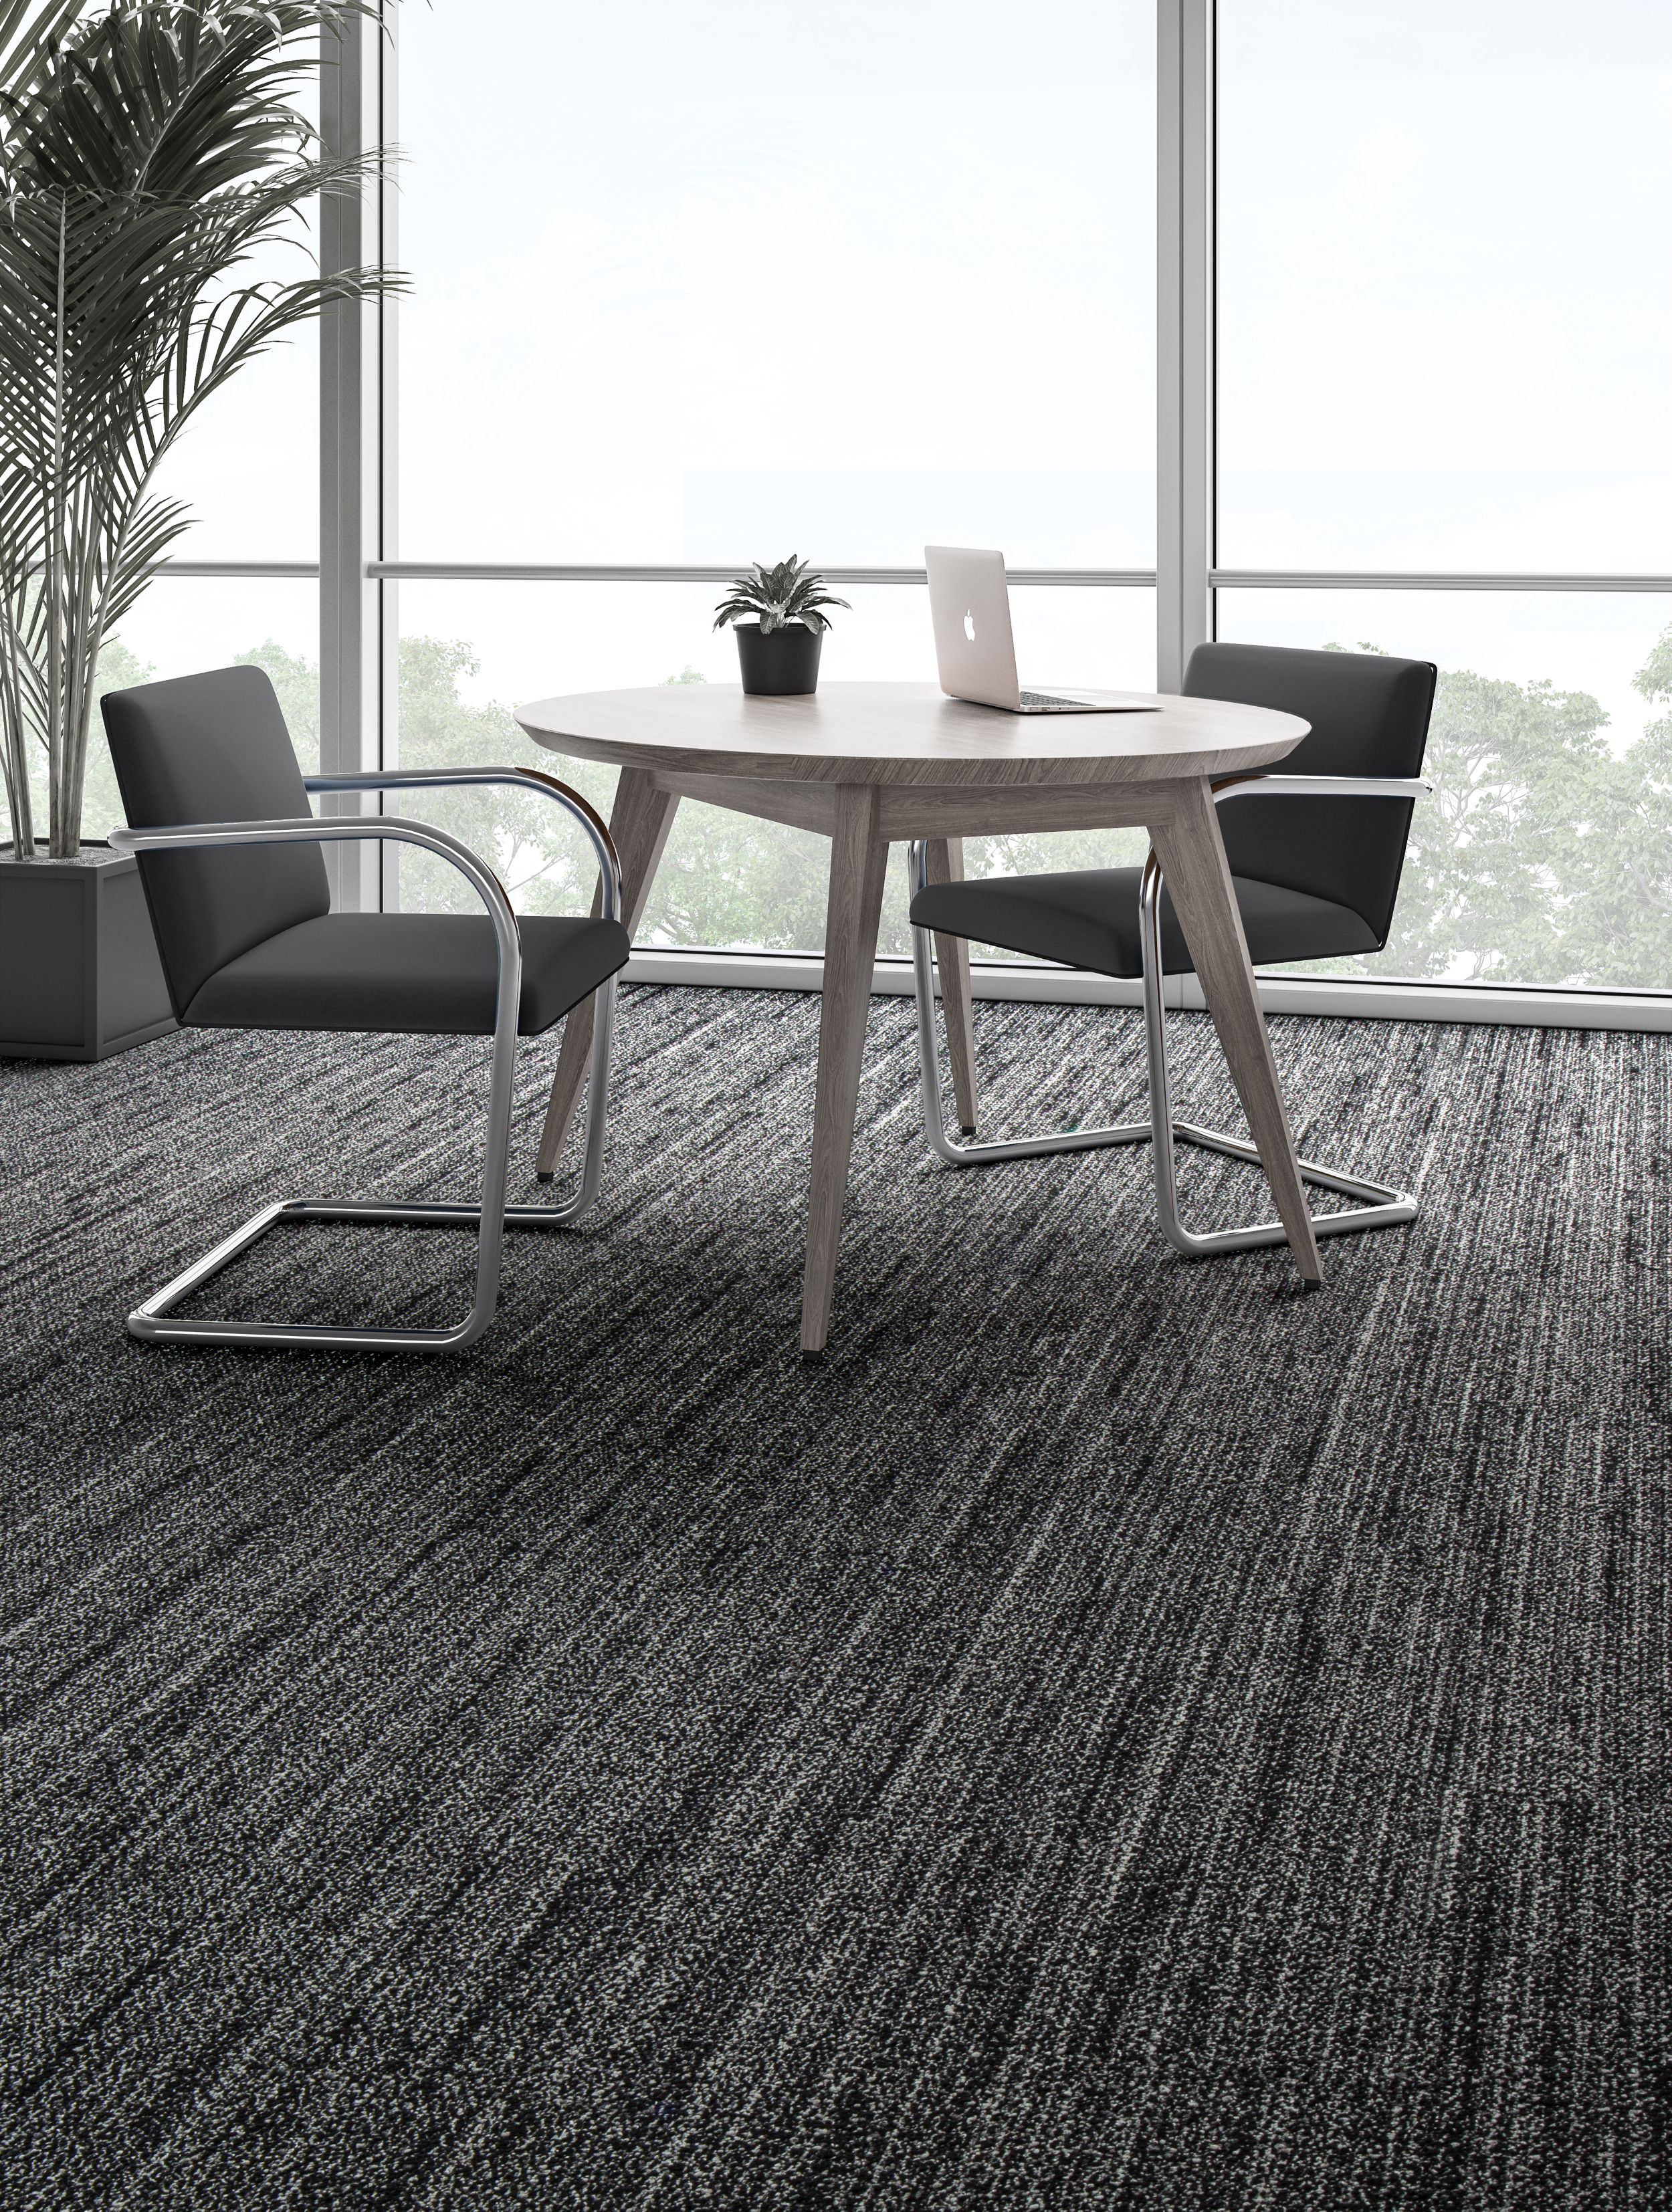 Interface WW870 plank carpet tile shown with small table and chairs image number 12